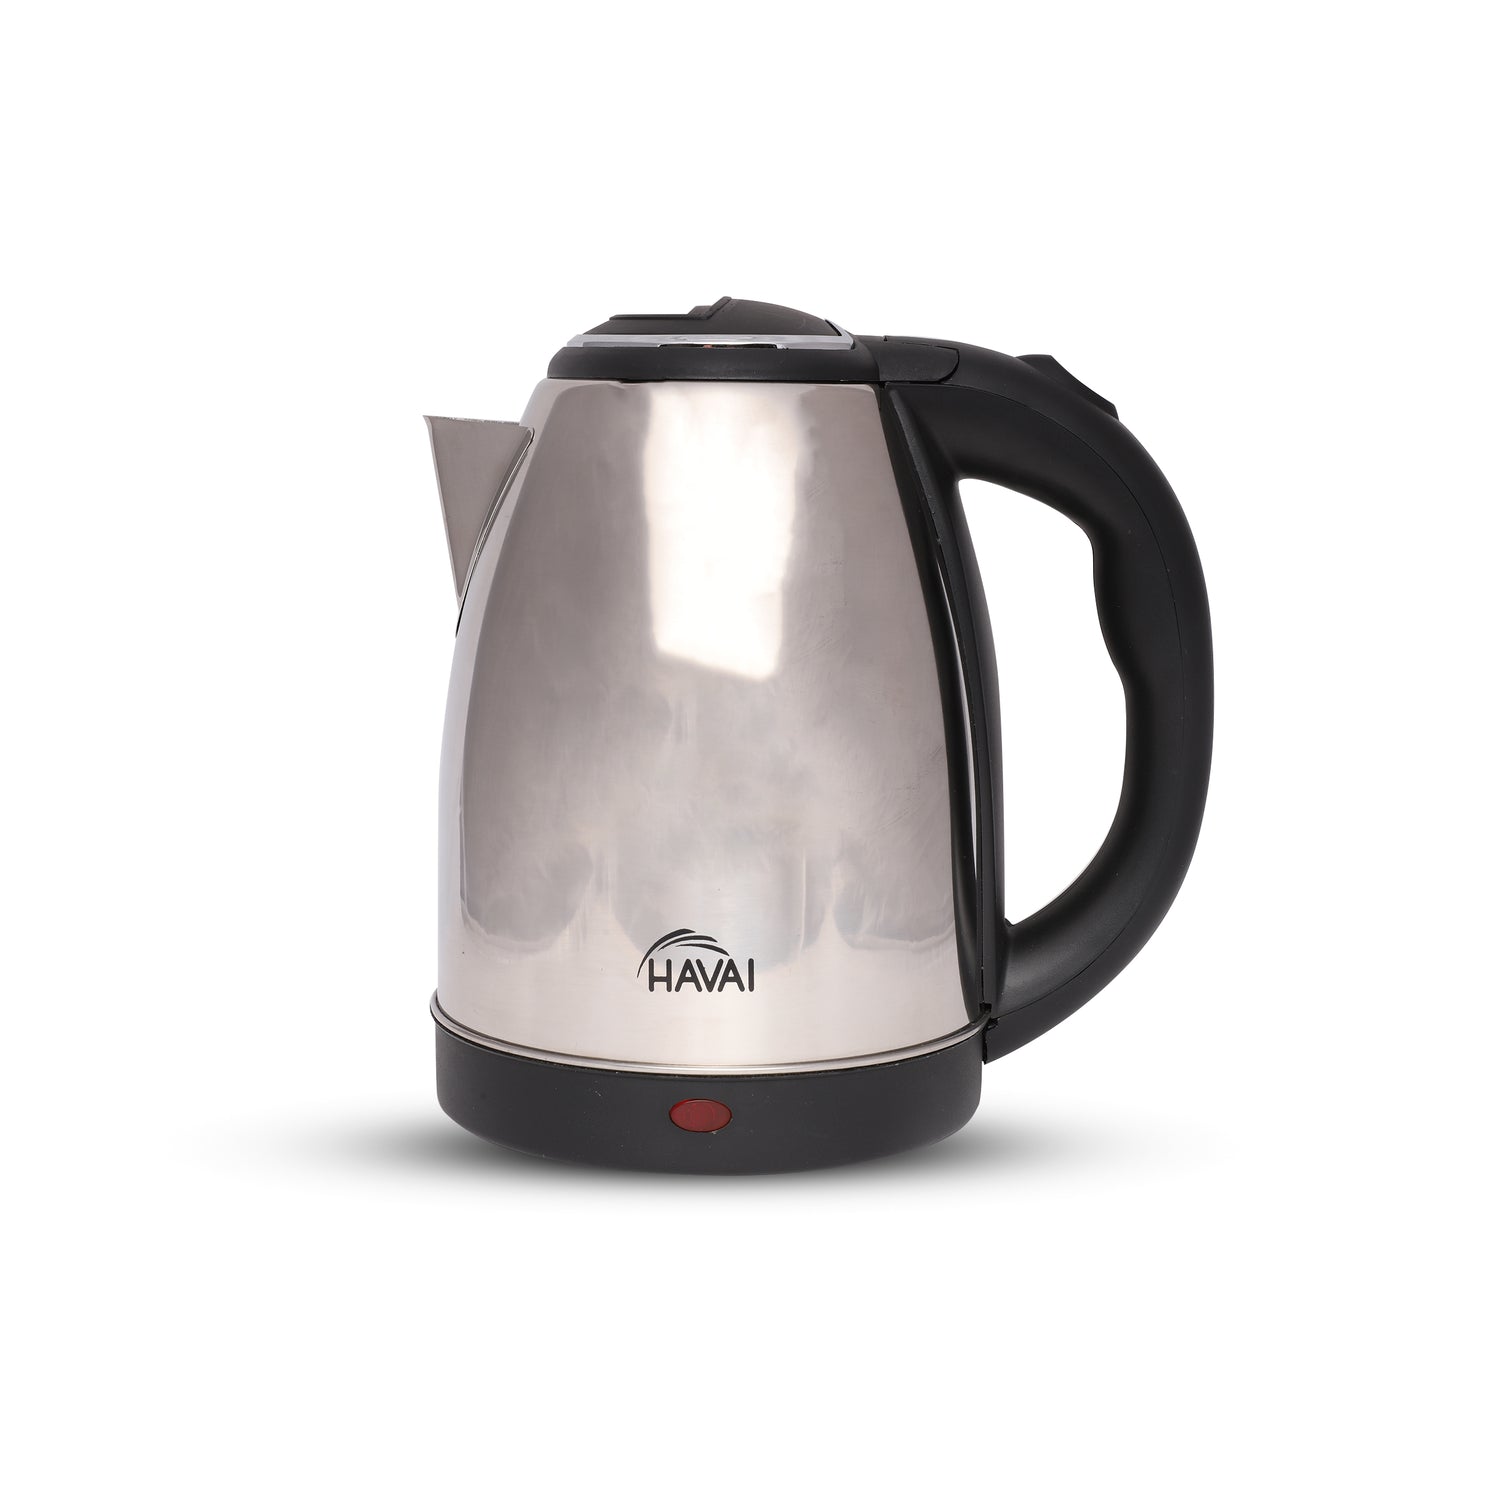 HAVAI Large Premium Electric Kettle 1.8L |Stainless Steel Inner Body | Auto Power Cut | Boil Dry Protection &amp; Cool Touch Double Wall | Portable | 1500 Watts |1 Year Warranty - STAINLESS STEEL